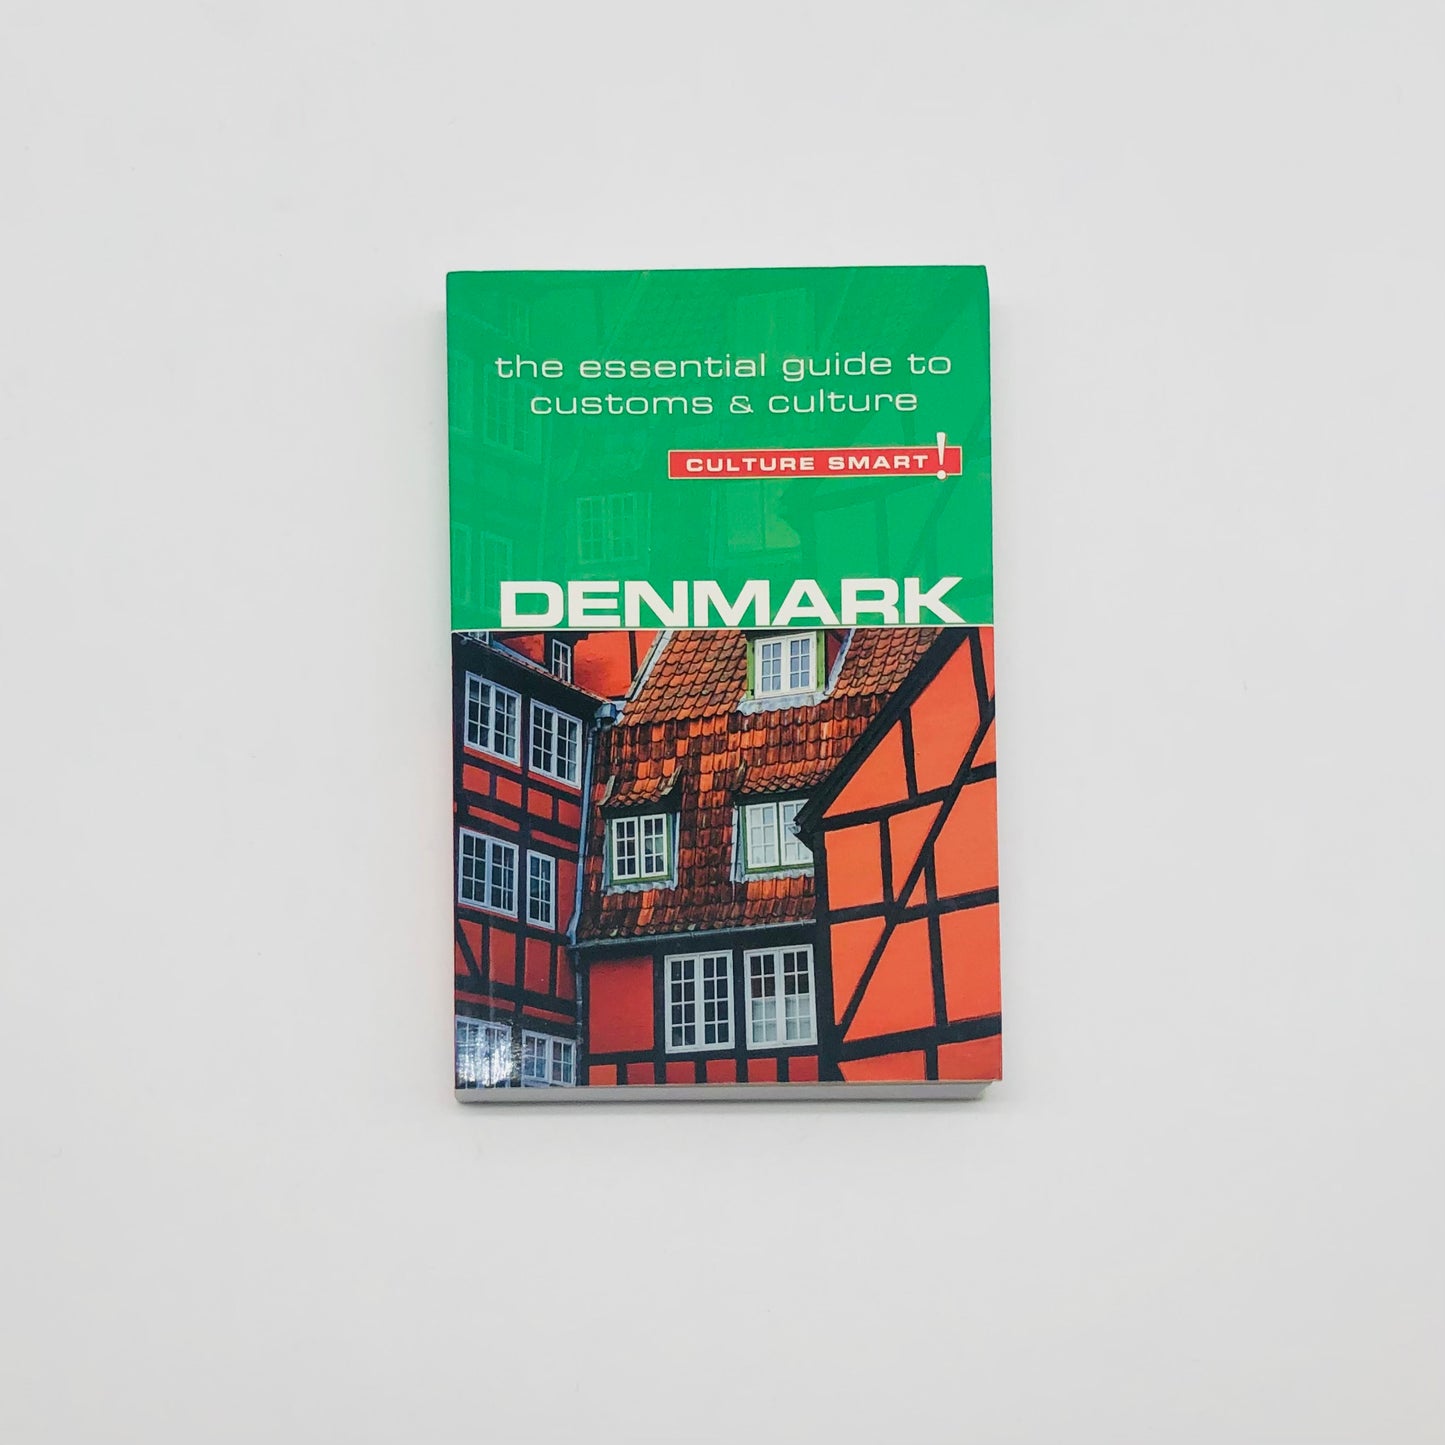 Mention Denmark and some people will think of marauding Vikings with horned helmets or one of Denmark’s more famous exports—Carlsberg beer—or the fairy tales of Hans Christian Andersen. But of the Danes themselves they may know very little. The Danes tend to be more relaxed and less formal than their fellow Scandinavians—and more independently minded. Denmark Culture Smart